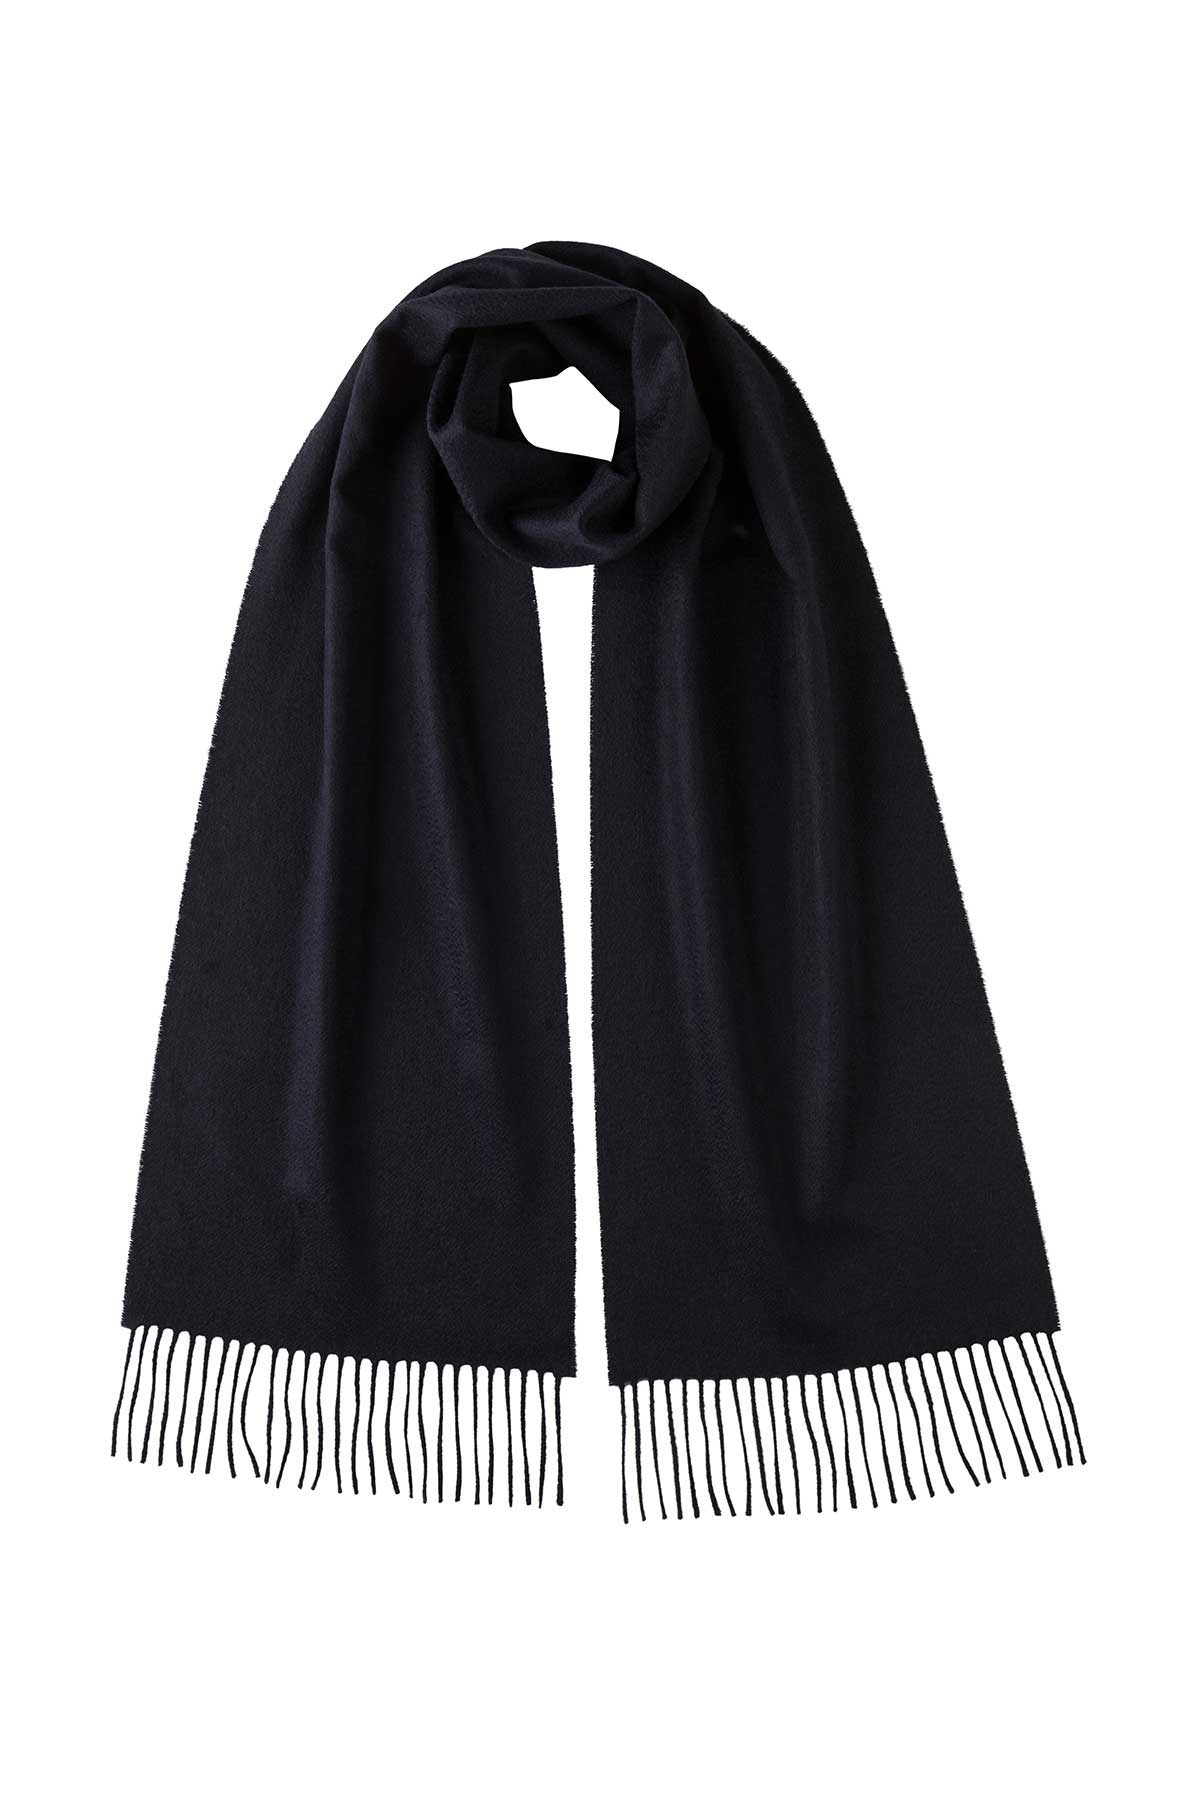 Johnstons of Elgin Cashmere Scarf in Dark Navy on a white background WA000016SD7330N/A